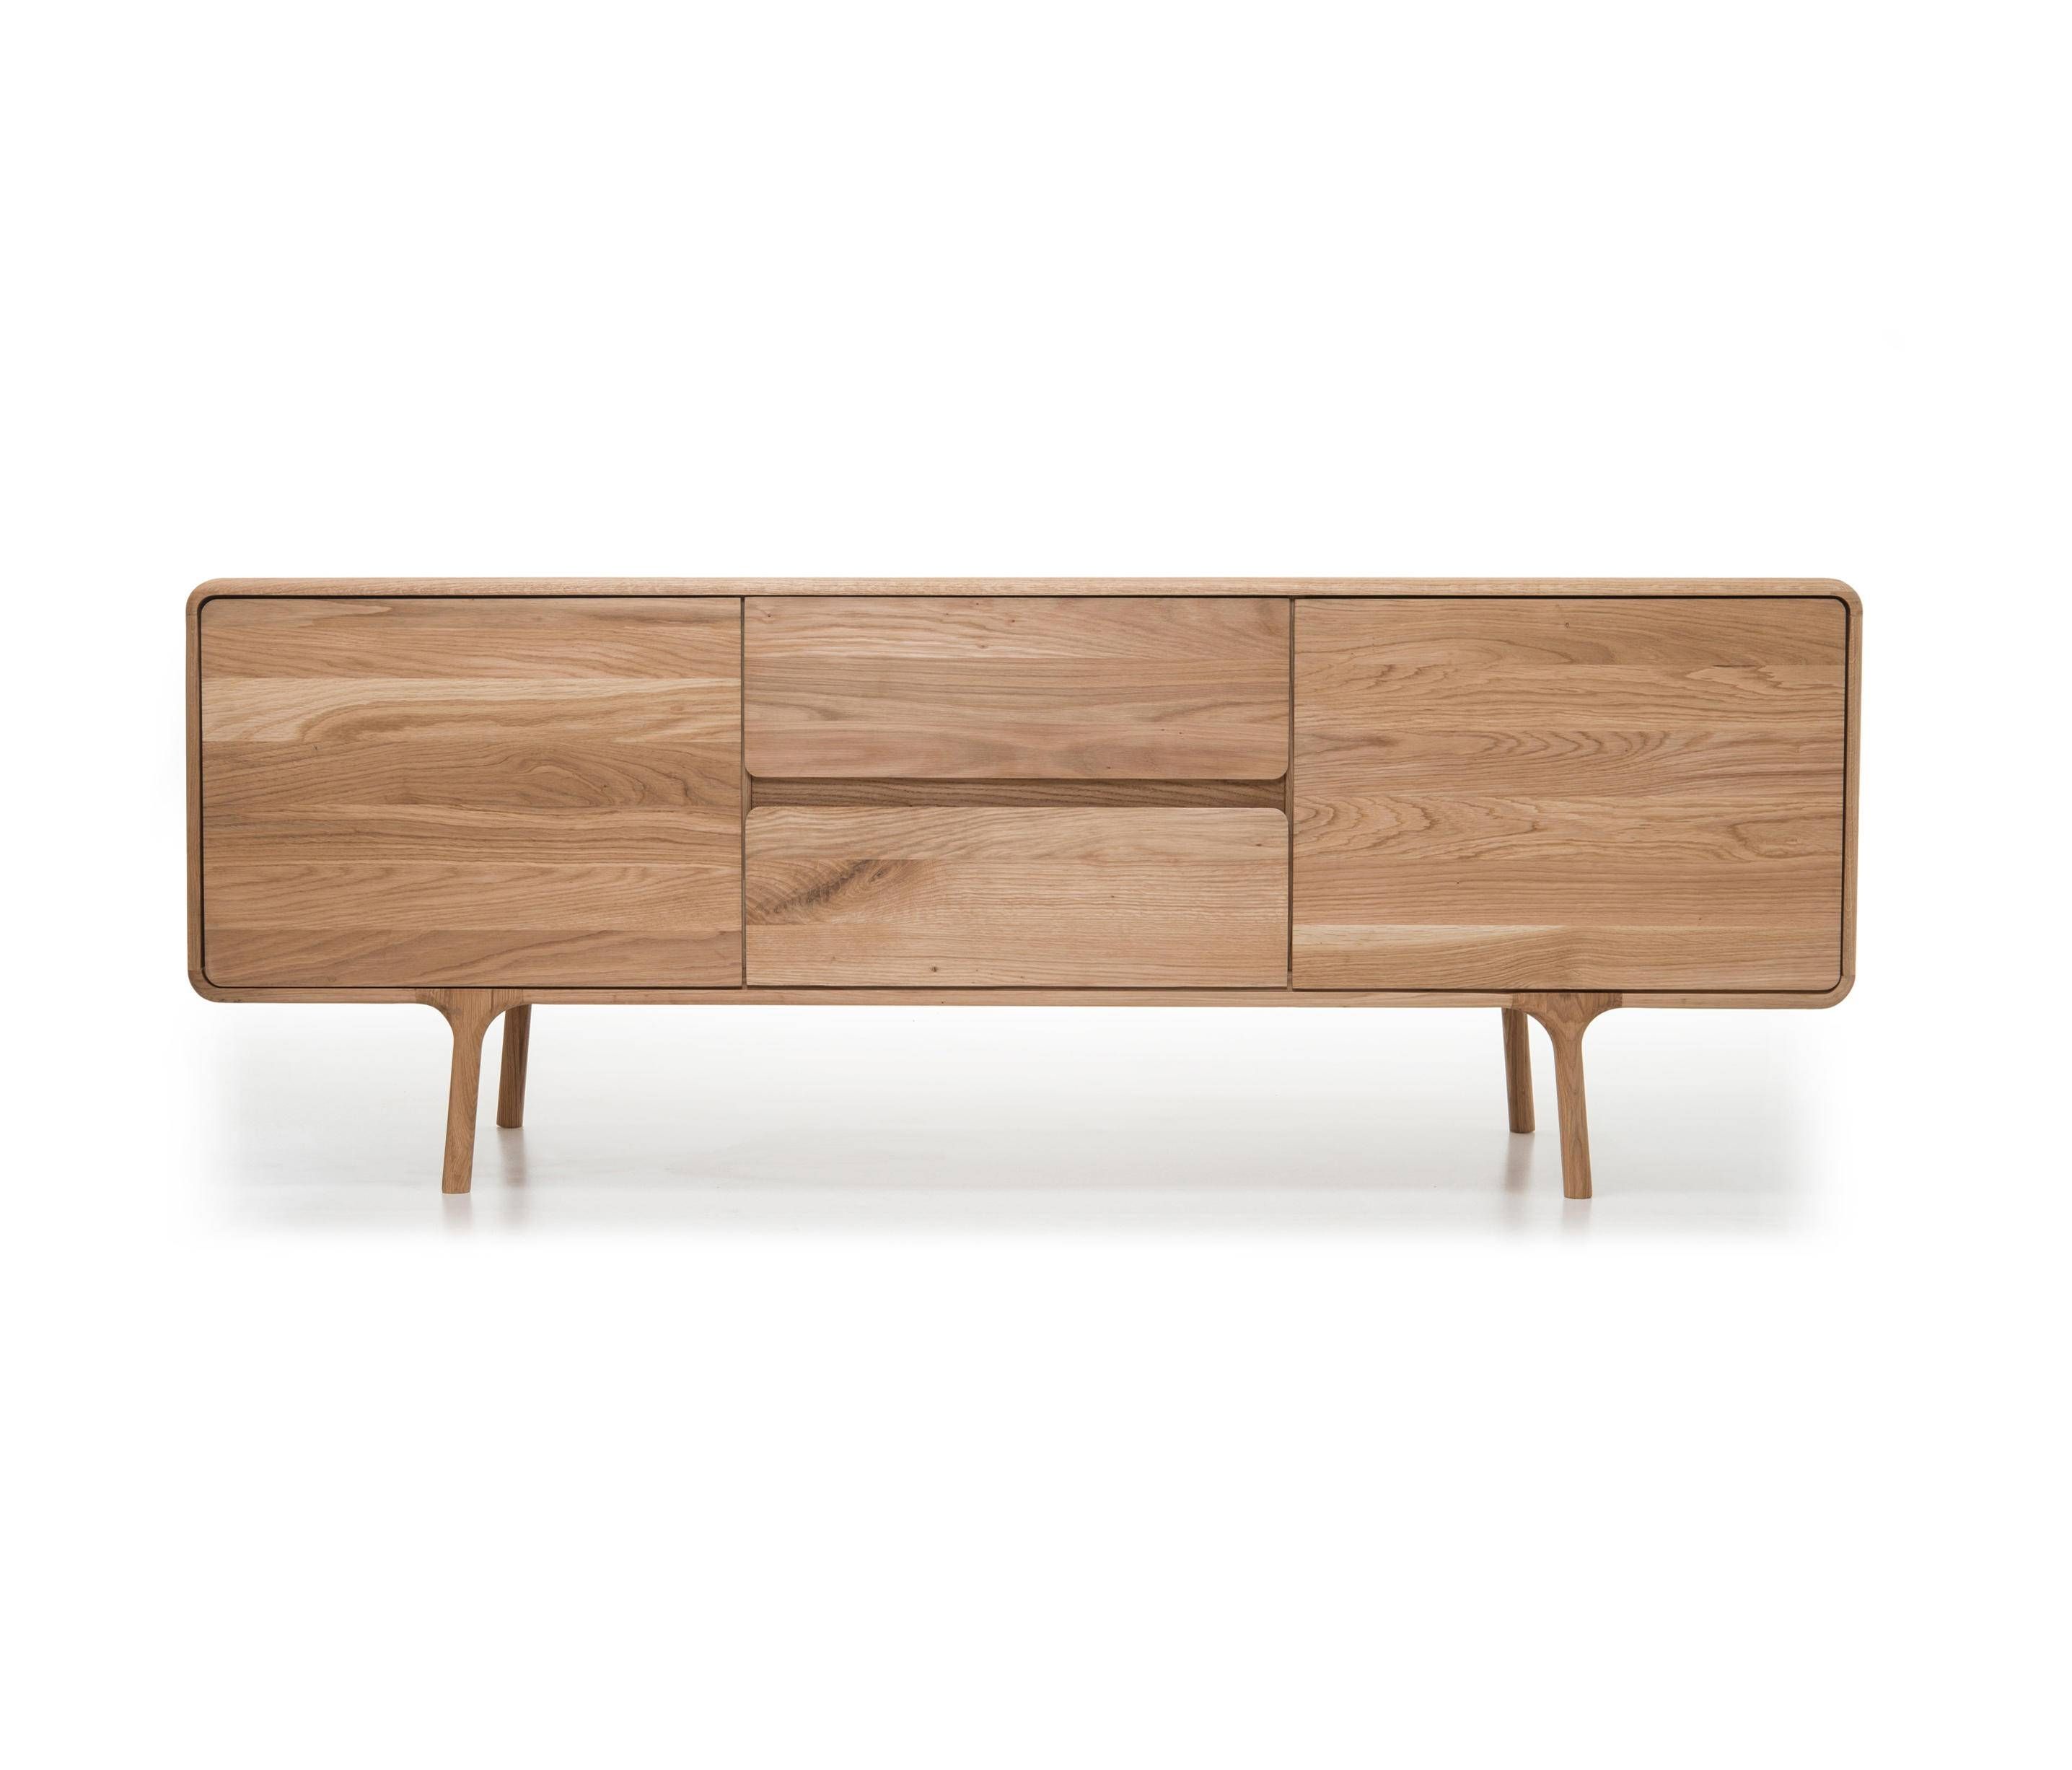 Fawn Sideboard – Sideboards From Gazzda | Architonic For Most Up To Date Small Low Sideboards (View 9 of 15)